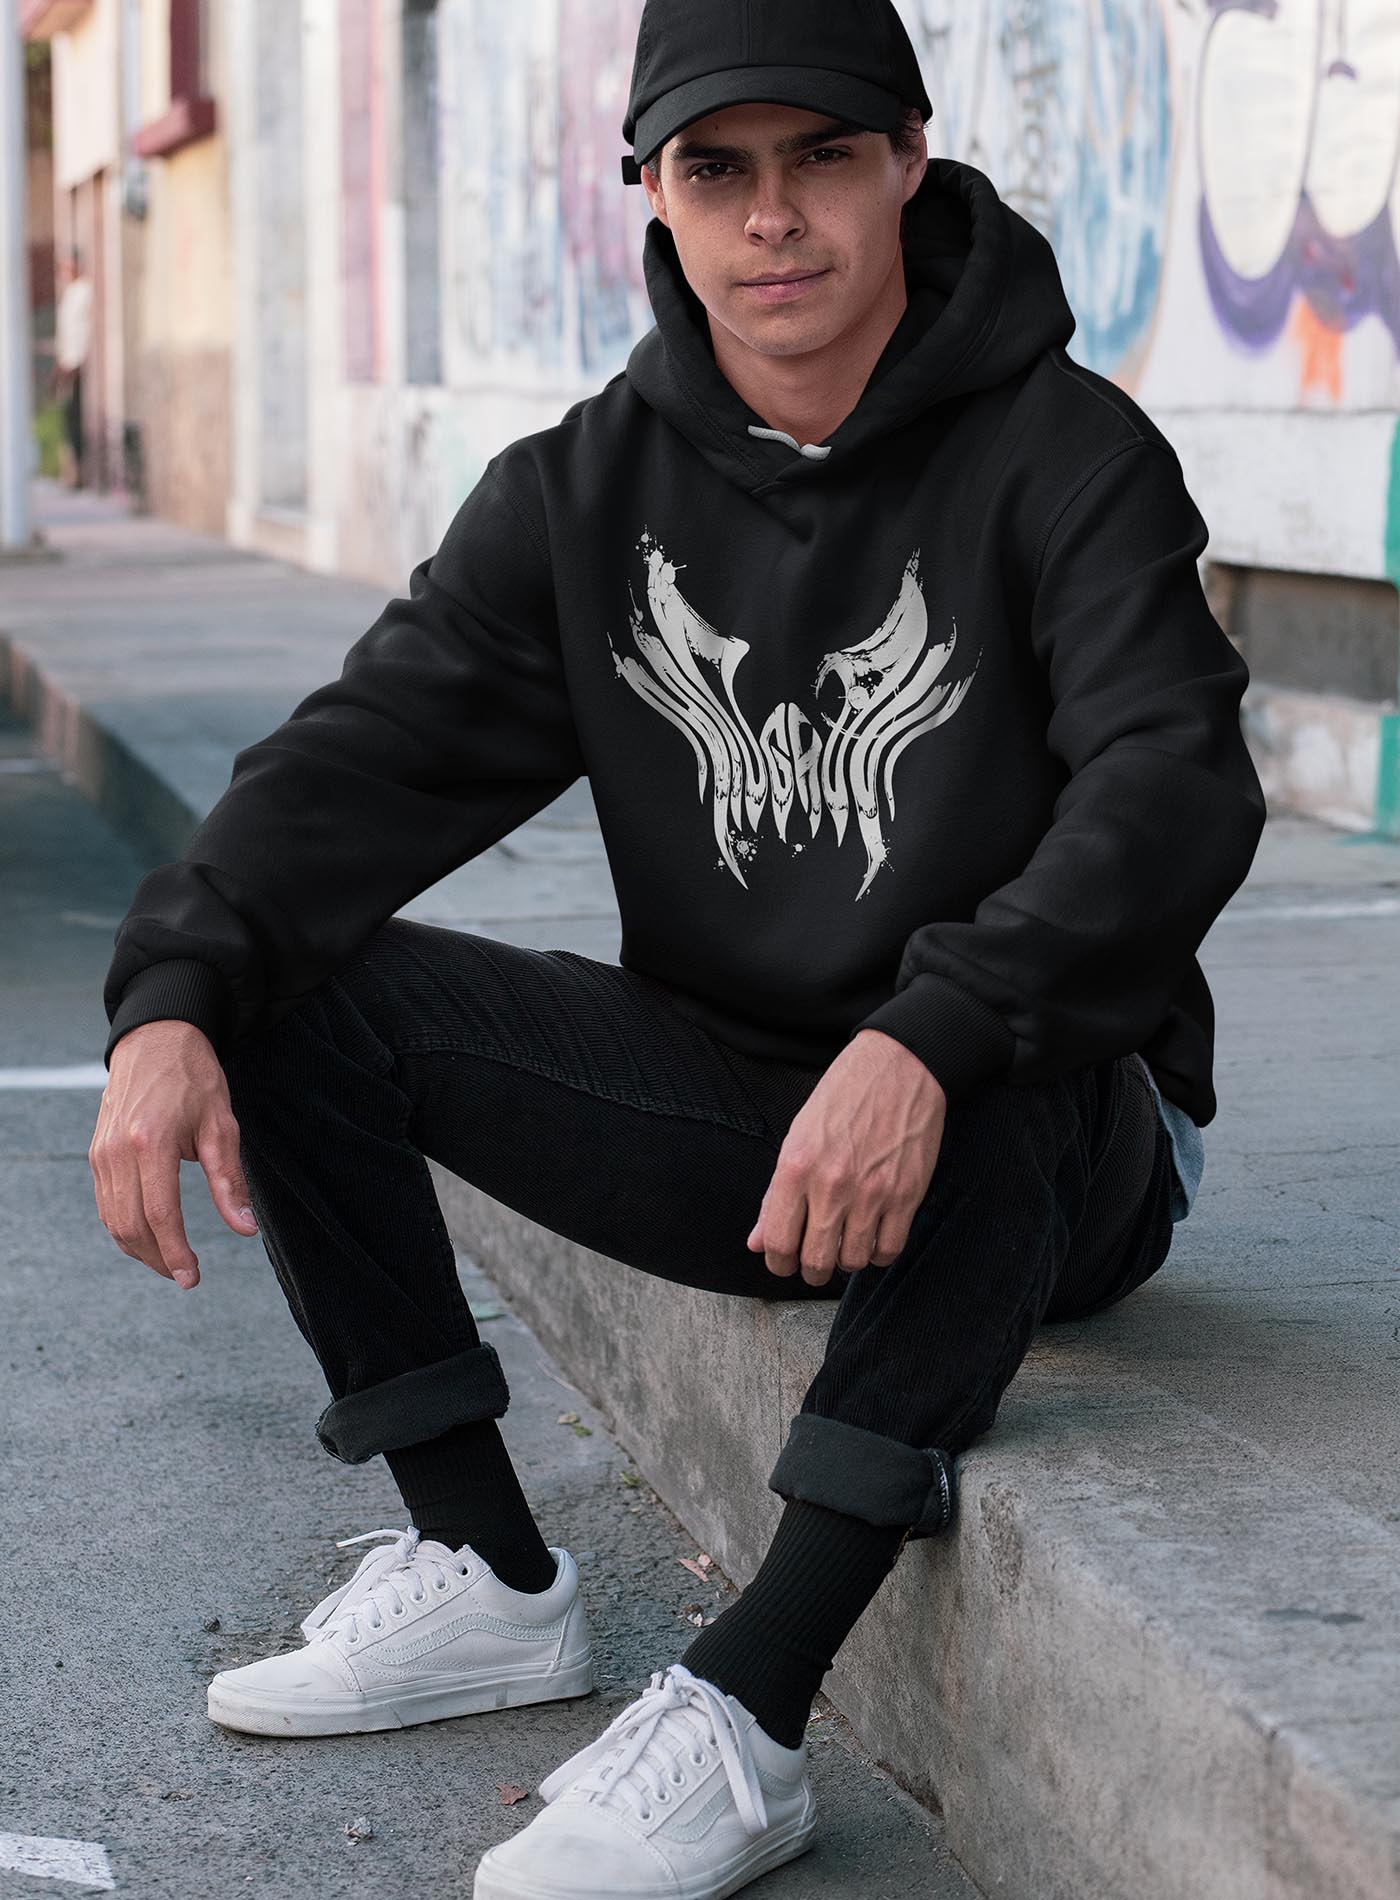 man modeling a Black unisex hoodie featuring a front print of the black Mr. Splatter Moghoul logo by Sasha Sidorovich.